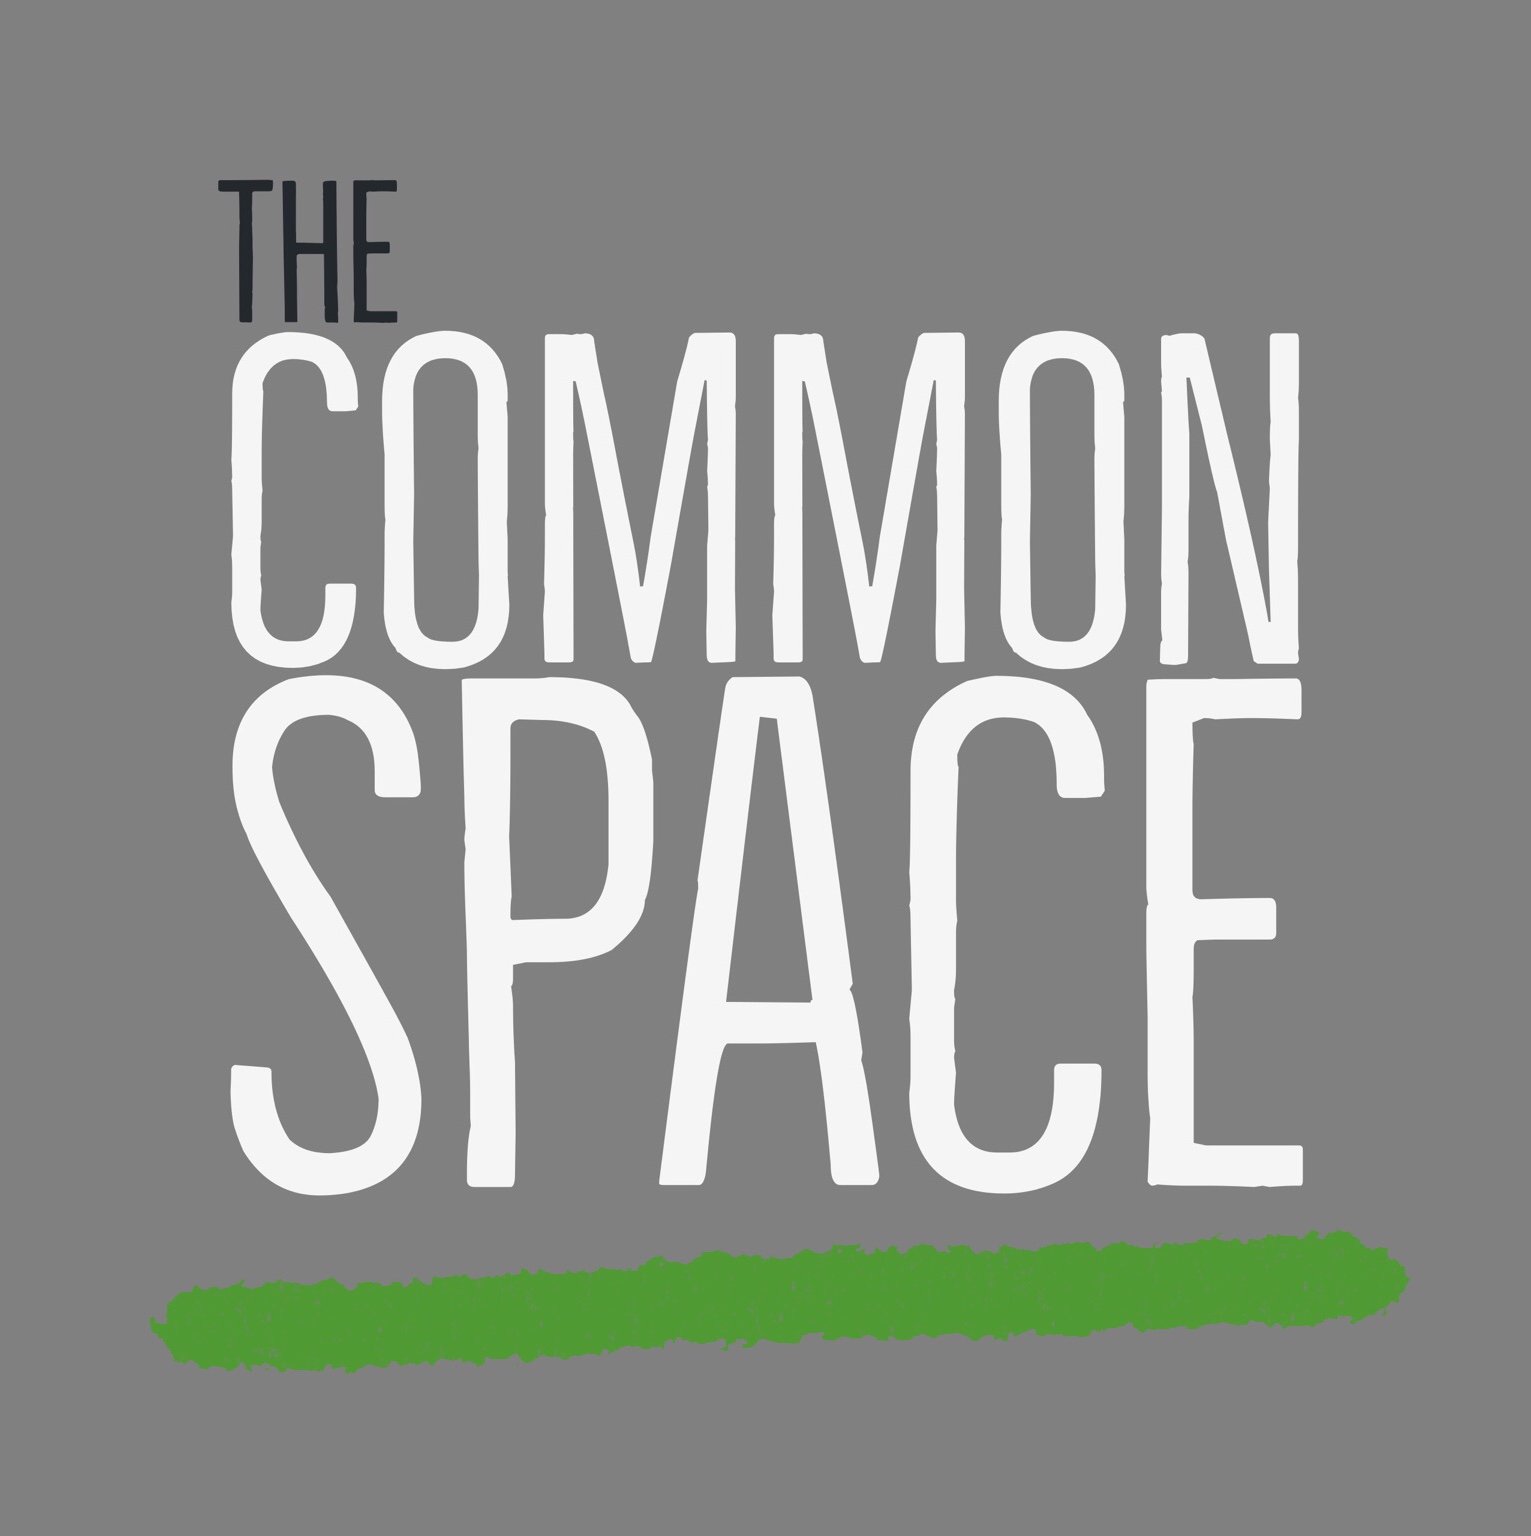 Visit The Common Space IW Profile